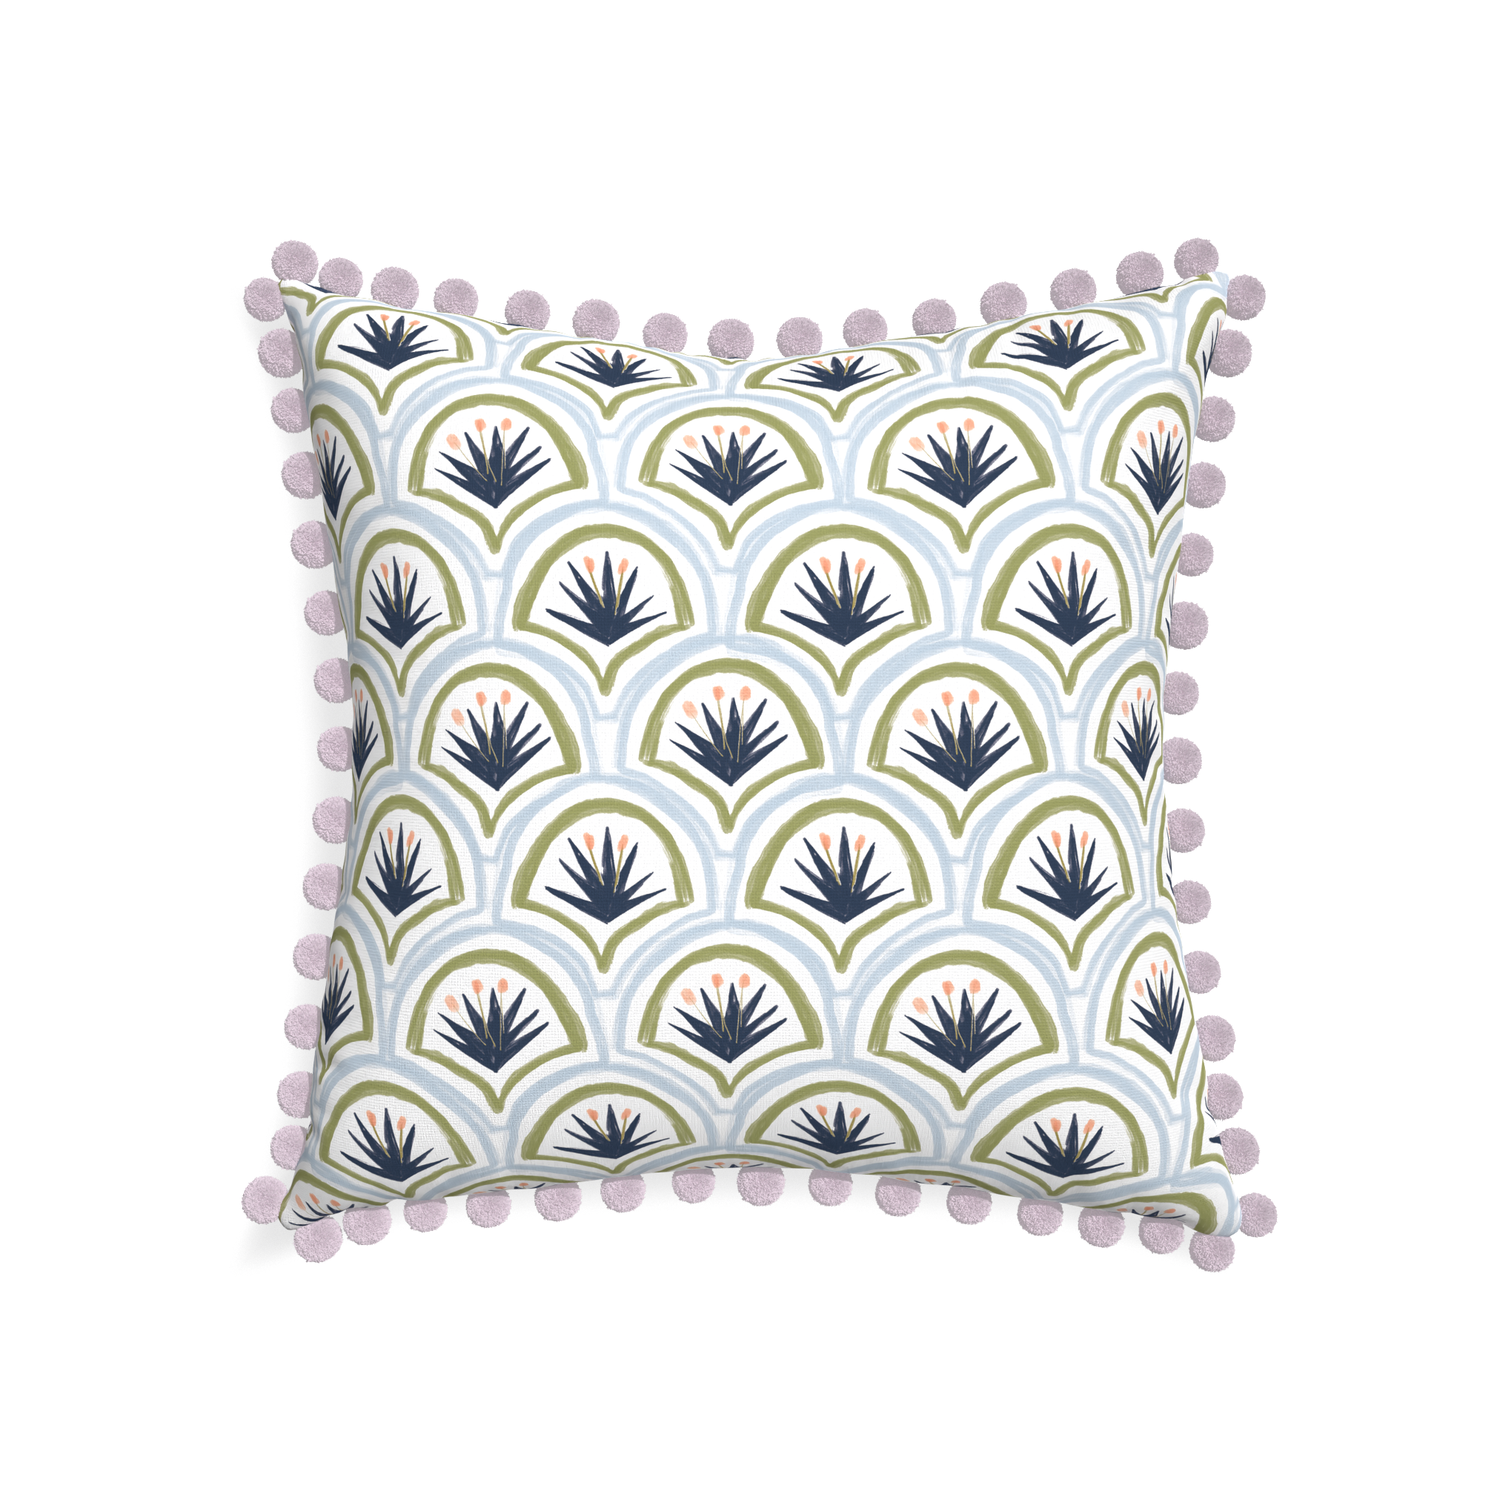 22-square thatcher midnight custom art deco palm patternpillow with l on white background